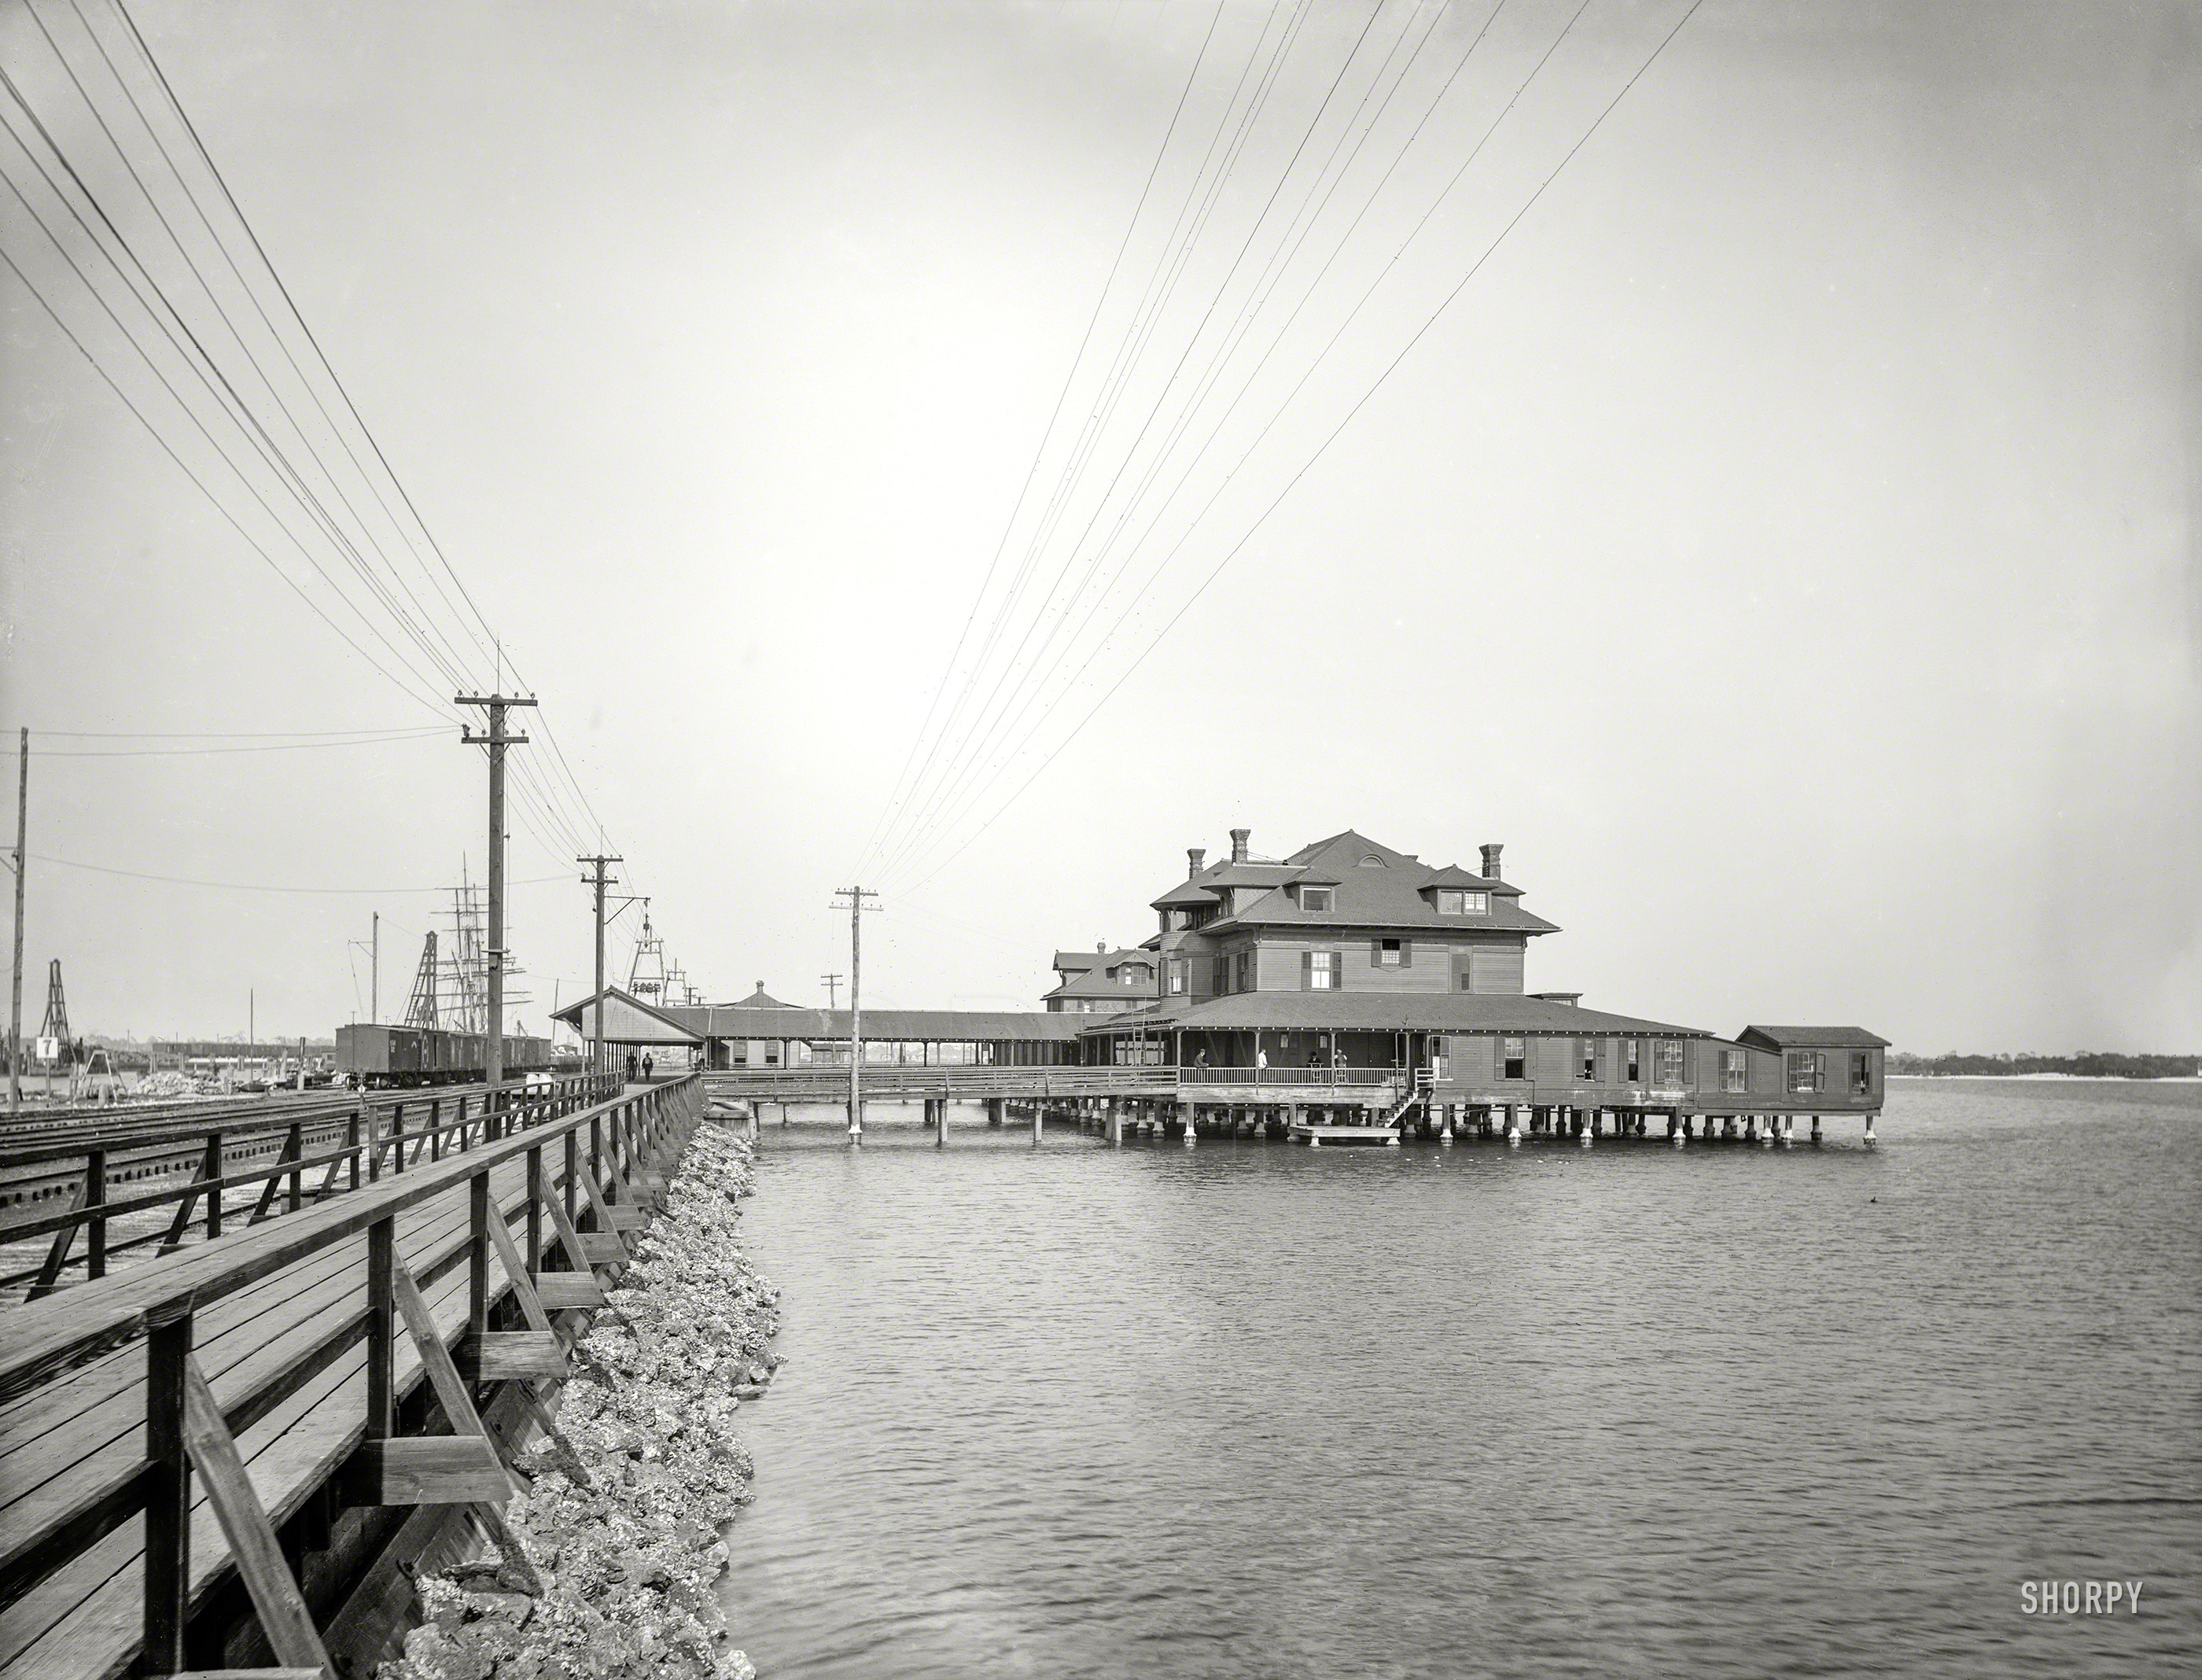 "Tampa Pier, Fla." The Port Tampa Inn, wharf and rail line circa 1898, captured on an 8x10 glass plate by William Henry Jackson. View full size.